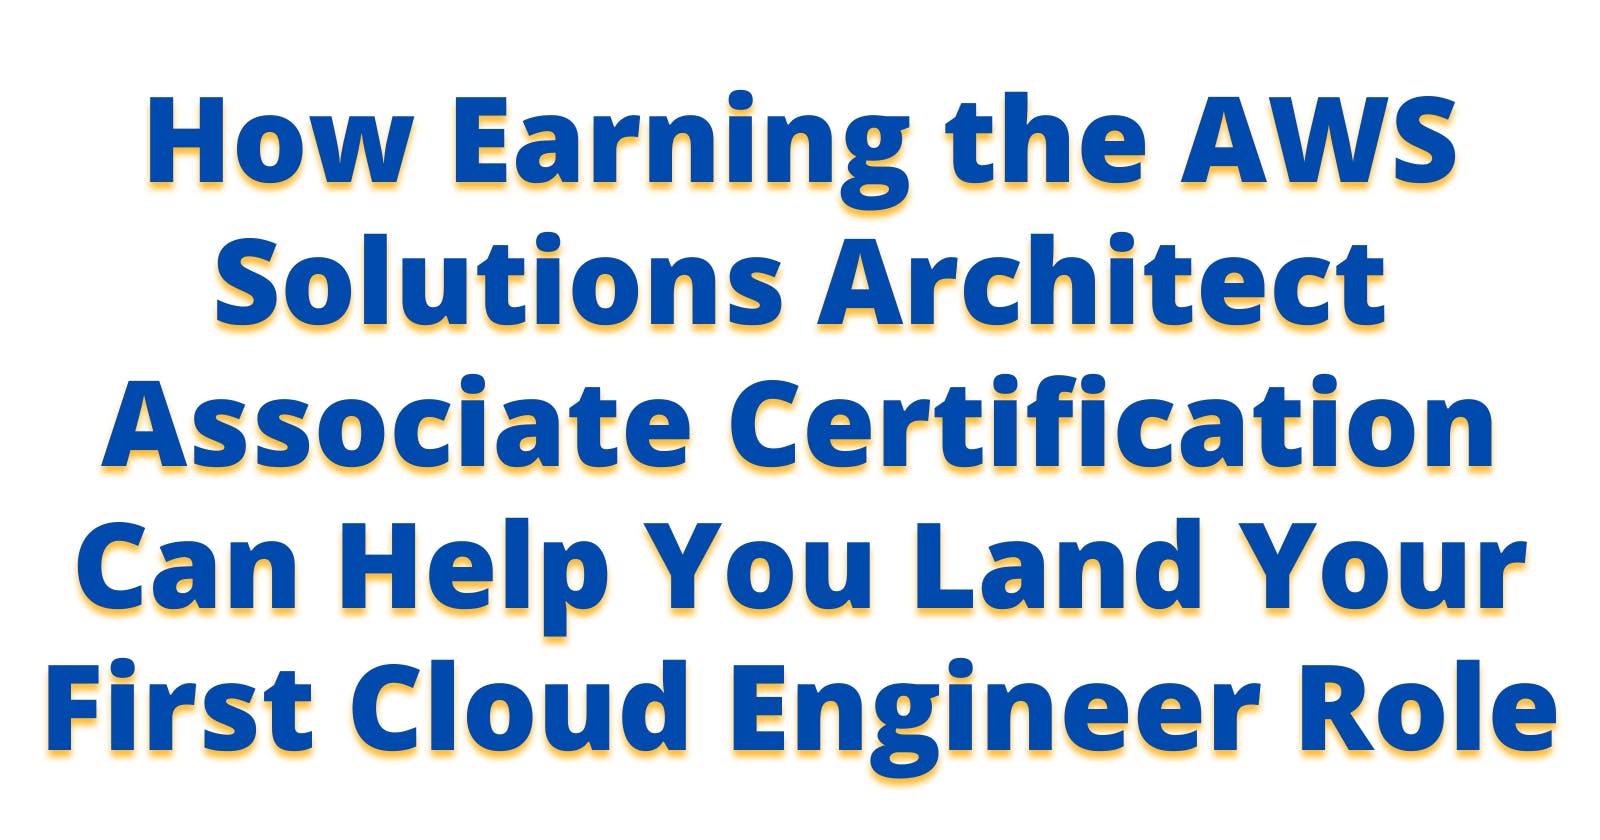 How Earning the AWS Solutions Architect Associate Certification Can Help You Land Your First Cloud Engineer Role